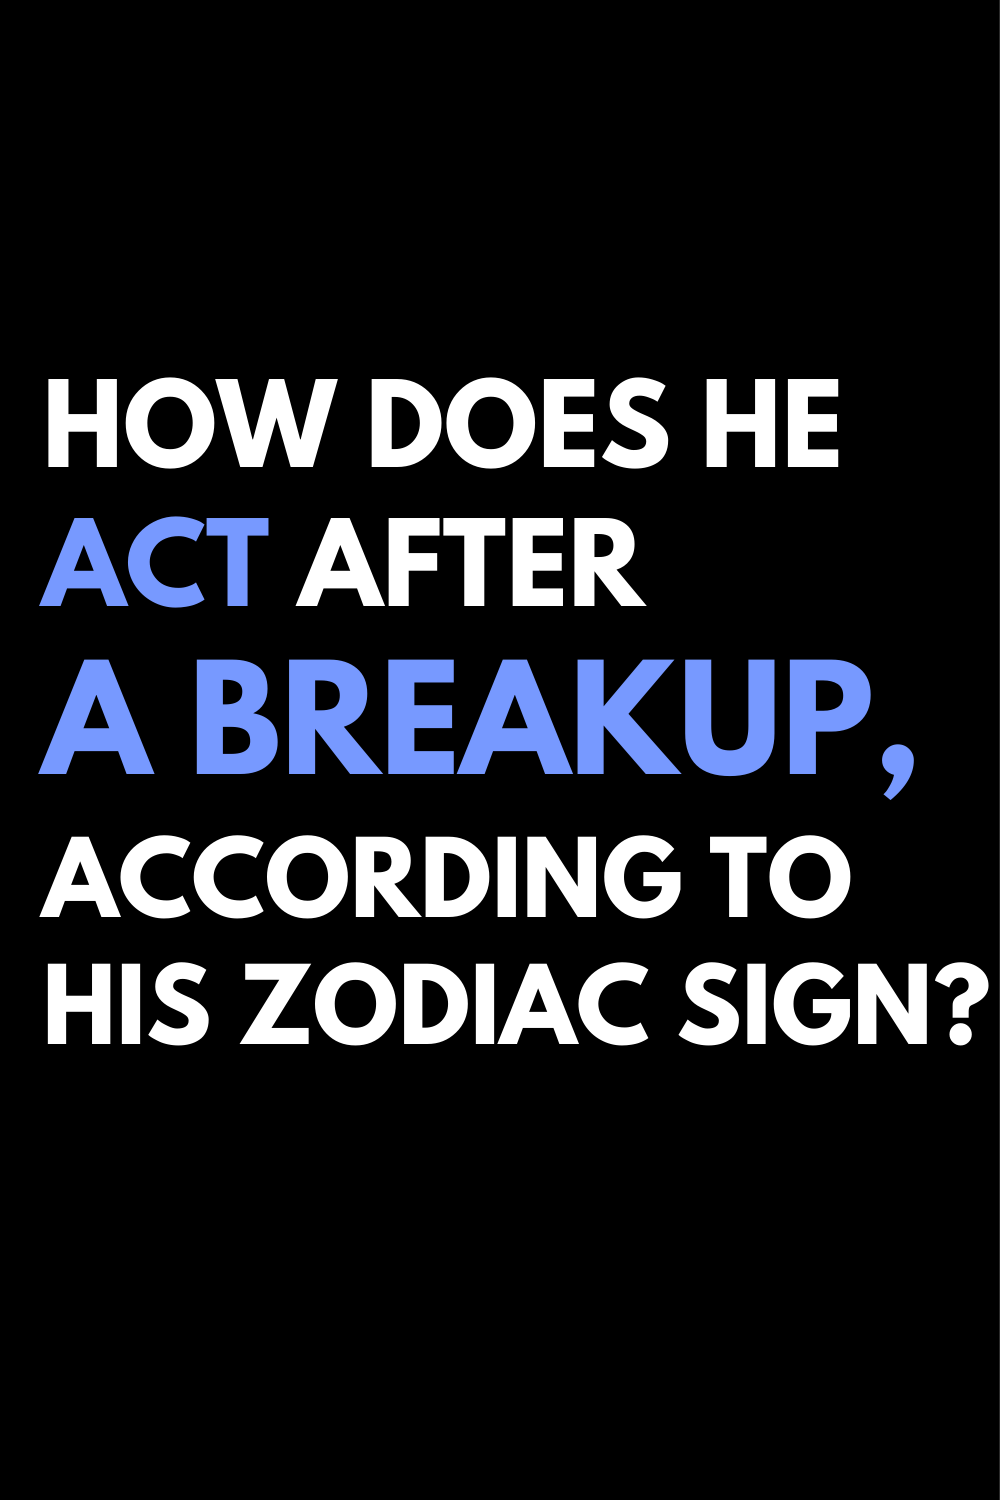 How Does He Act After A Breakup, According to His Zodiac Sign?